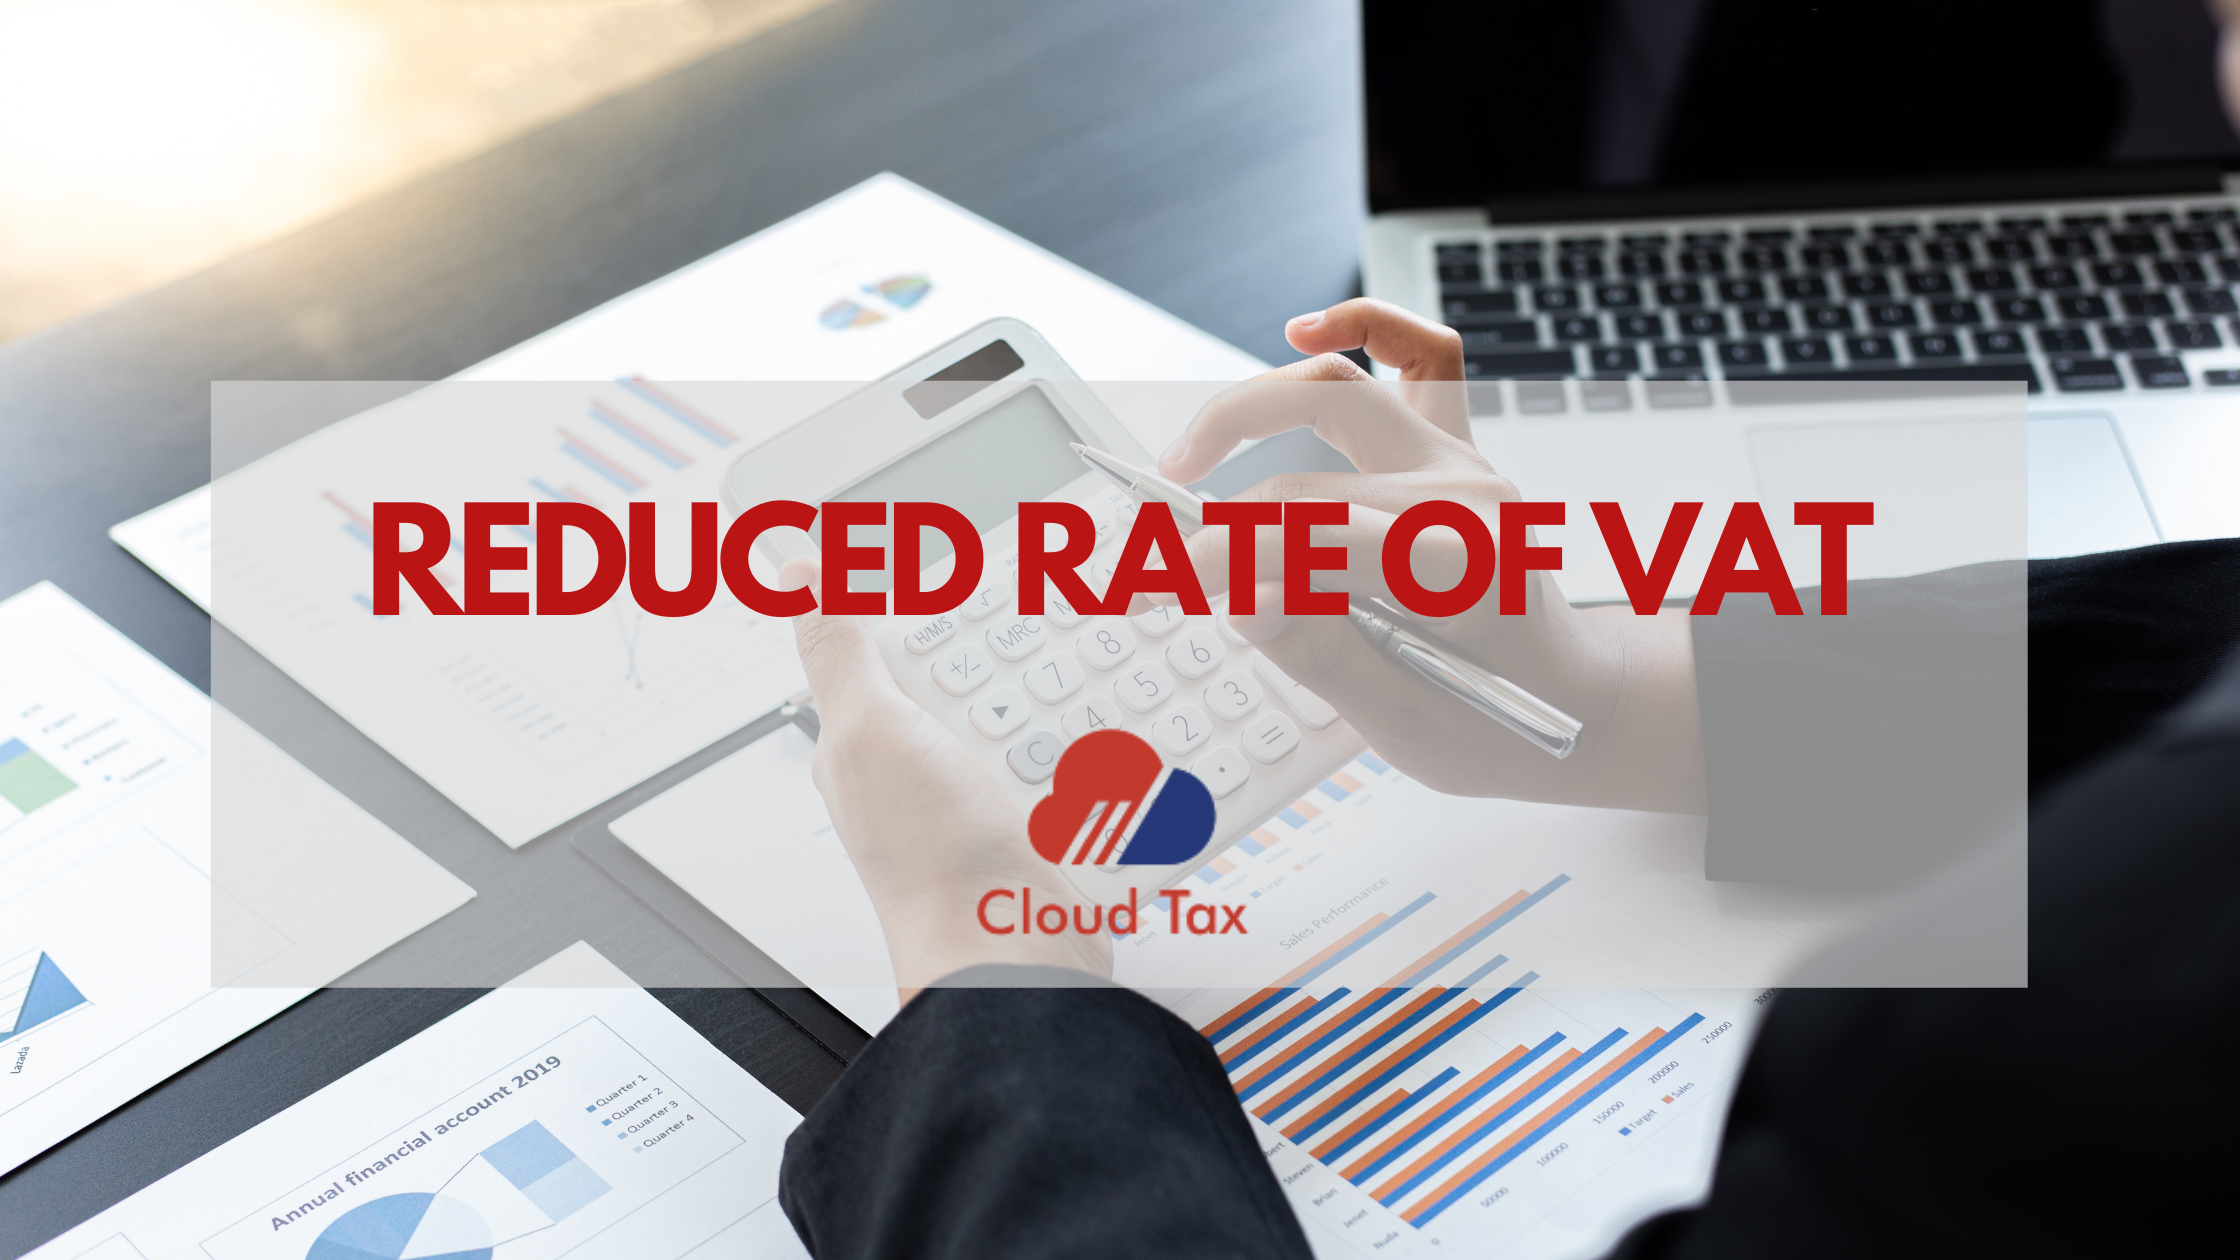 Reduced Rate of vat